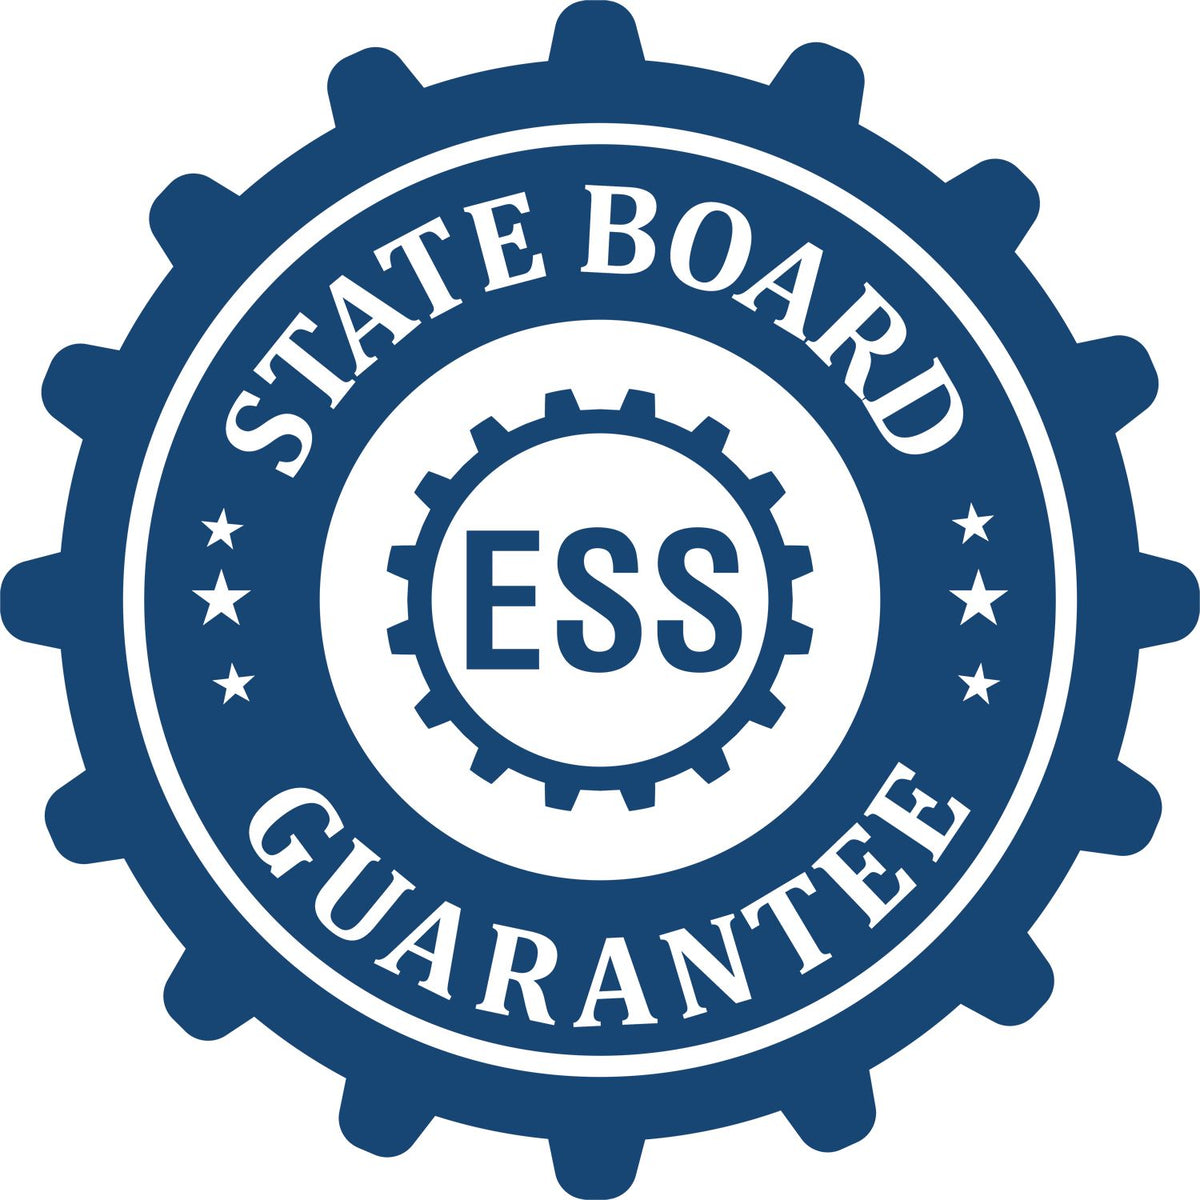 An emblem in a gear shape illustrating a state board guarantee for the Gift Texas Architect Seal